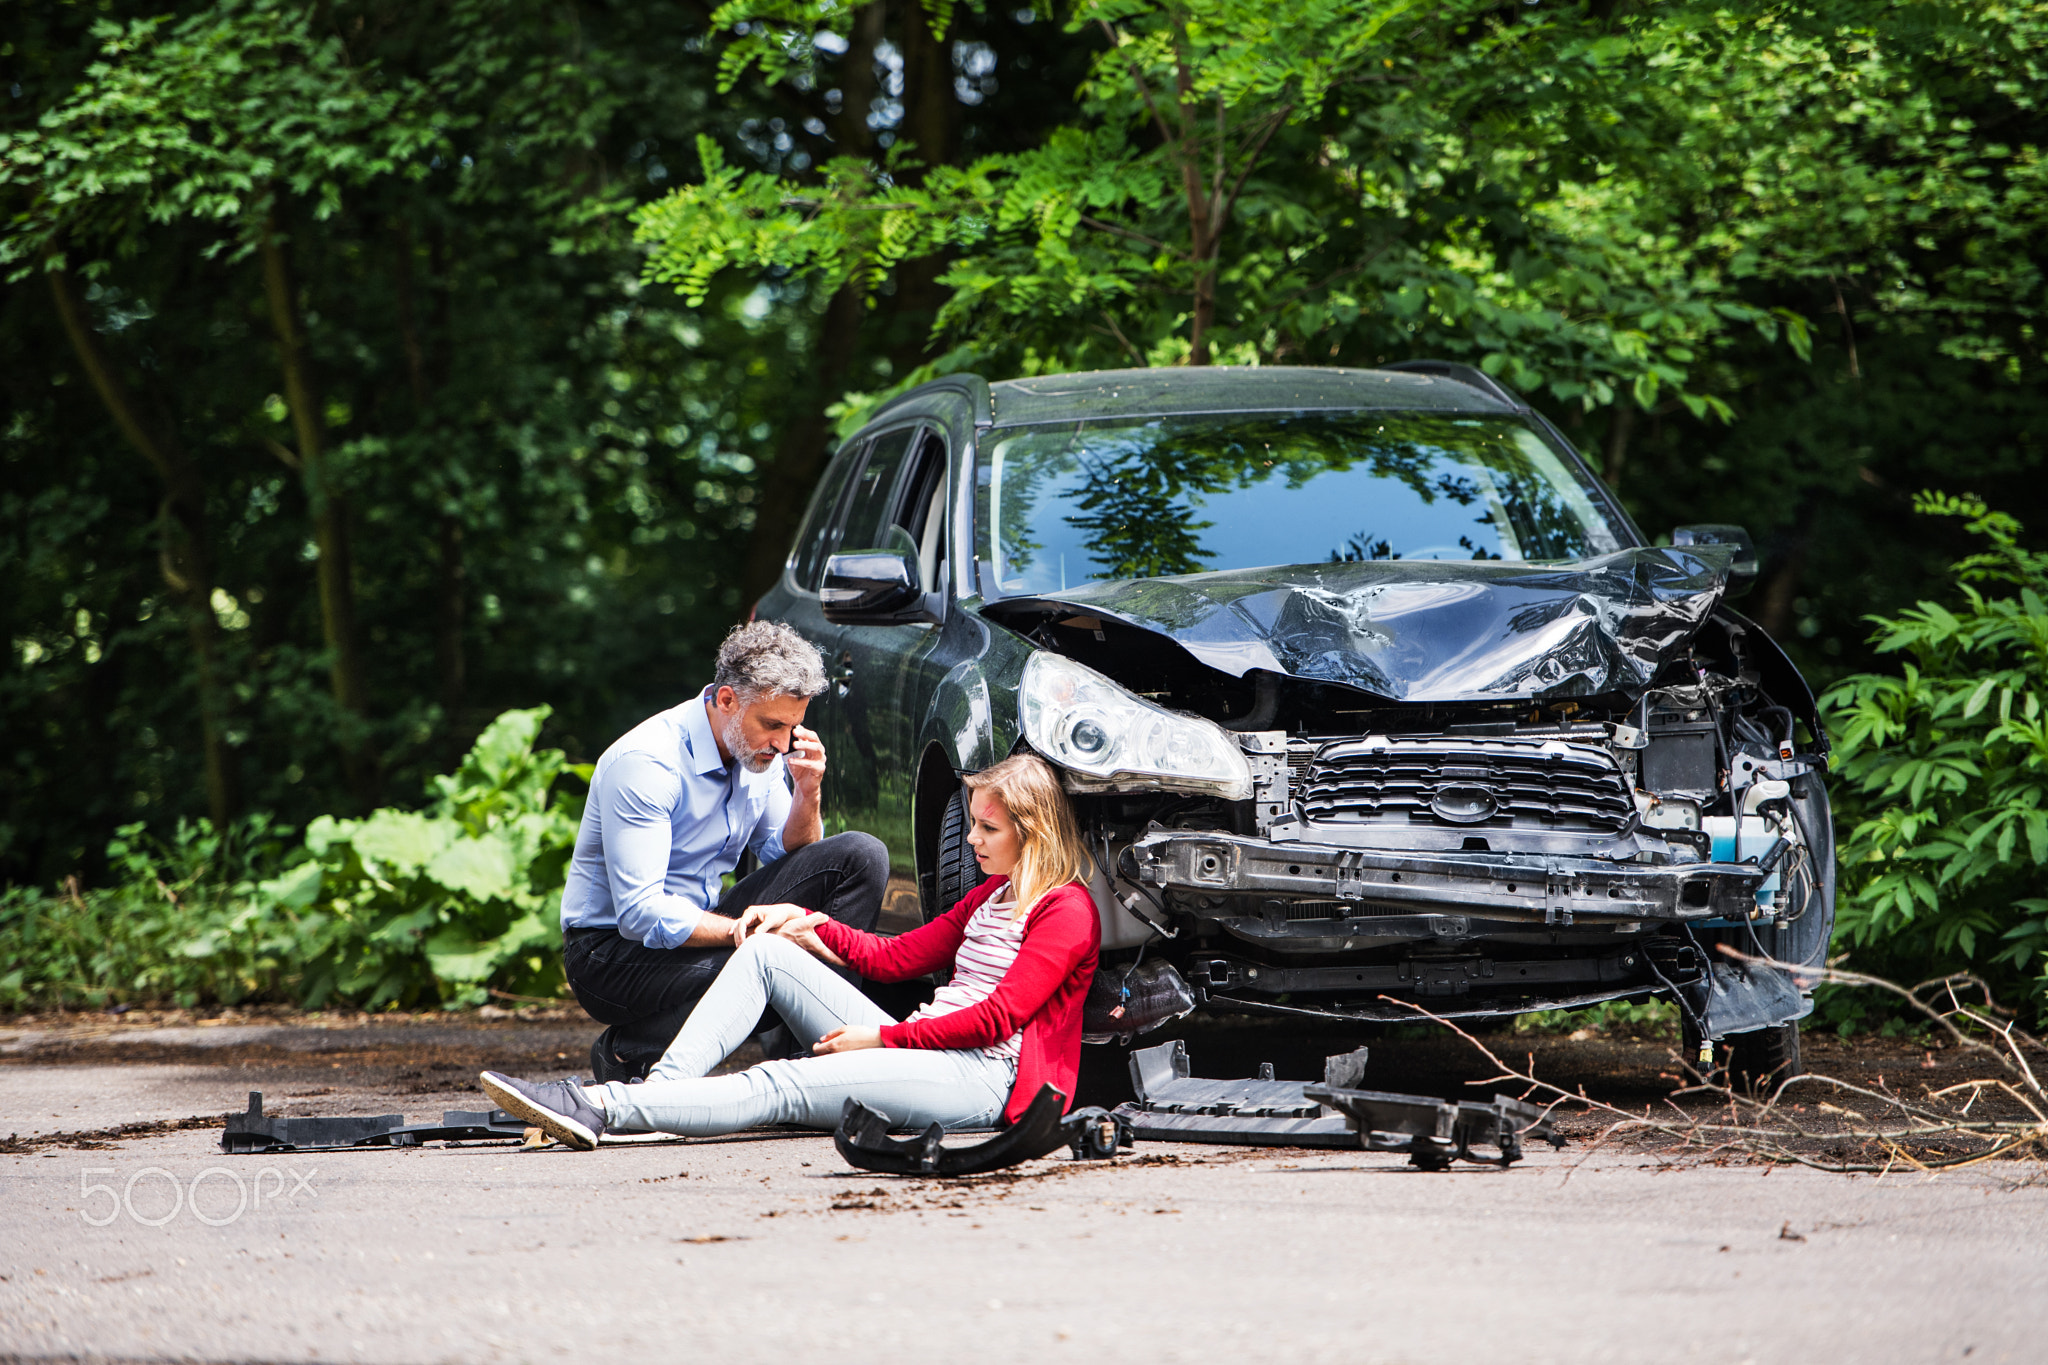 Young woman by the car after an accident and a man making a phone call.